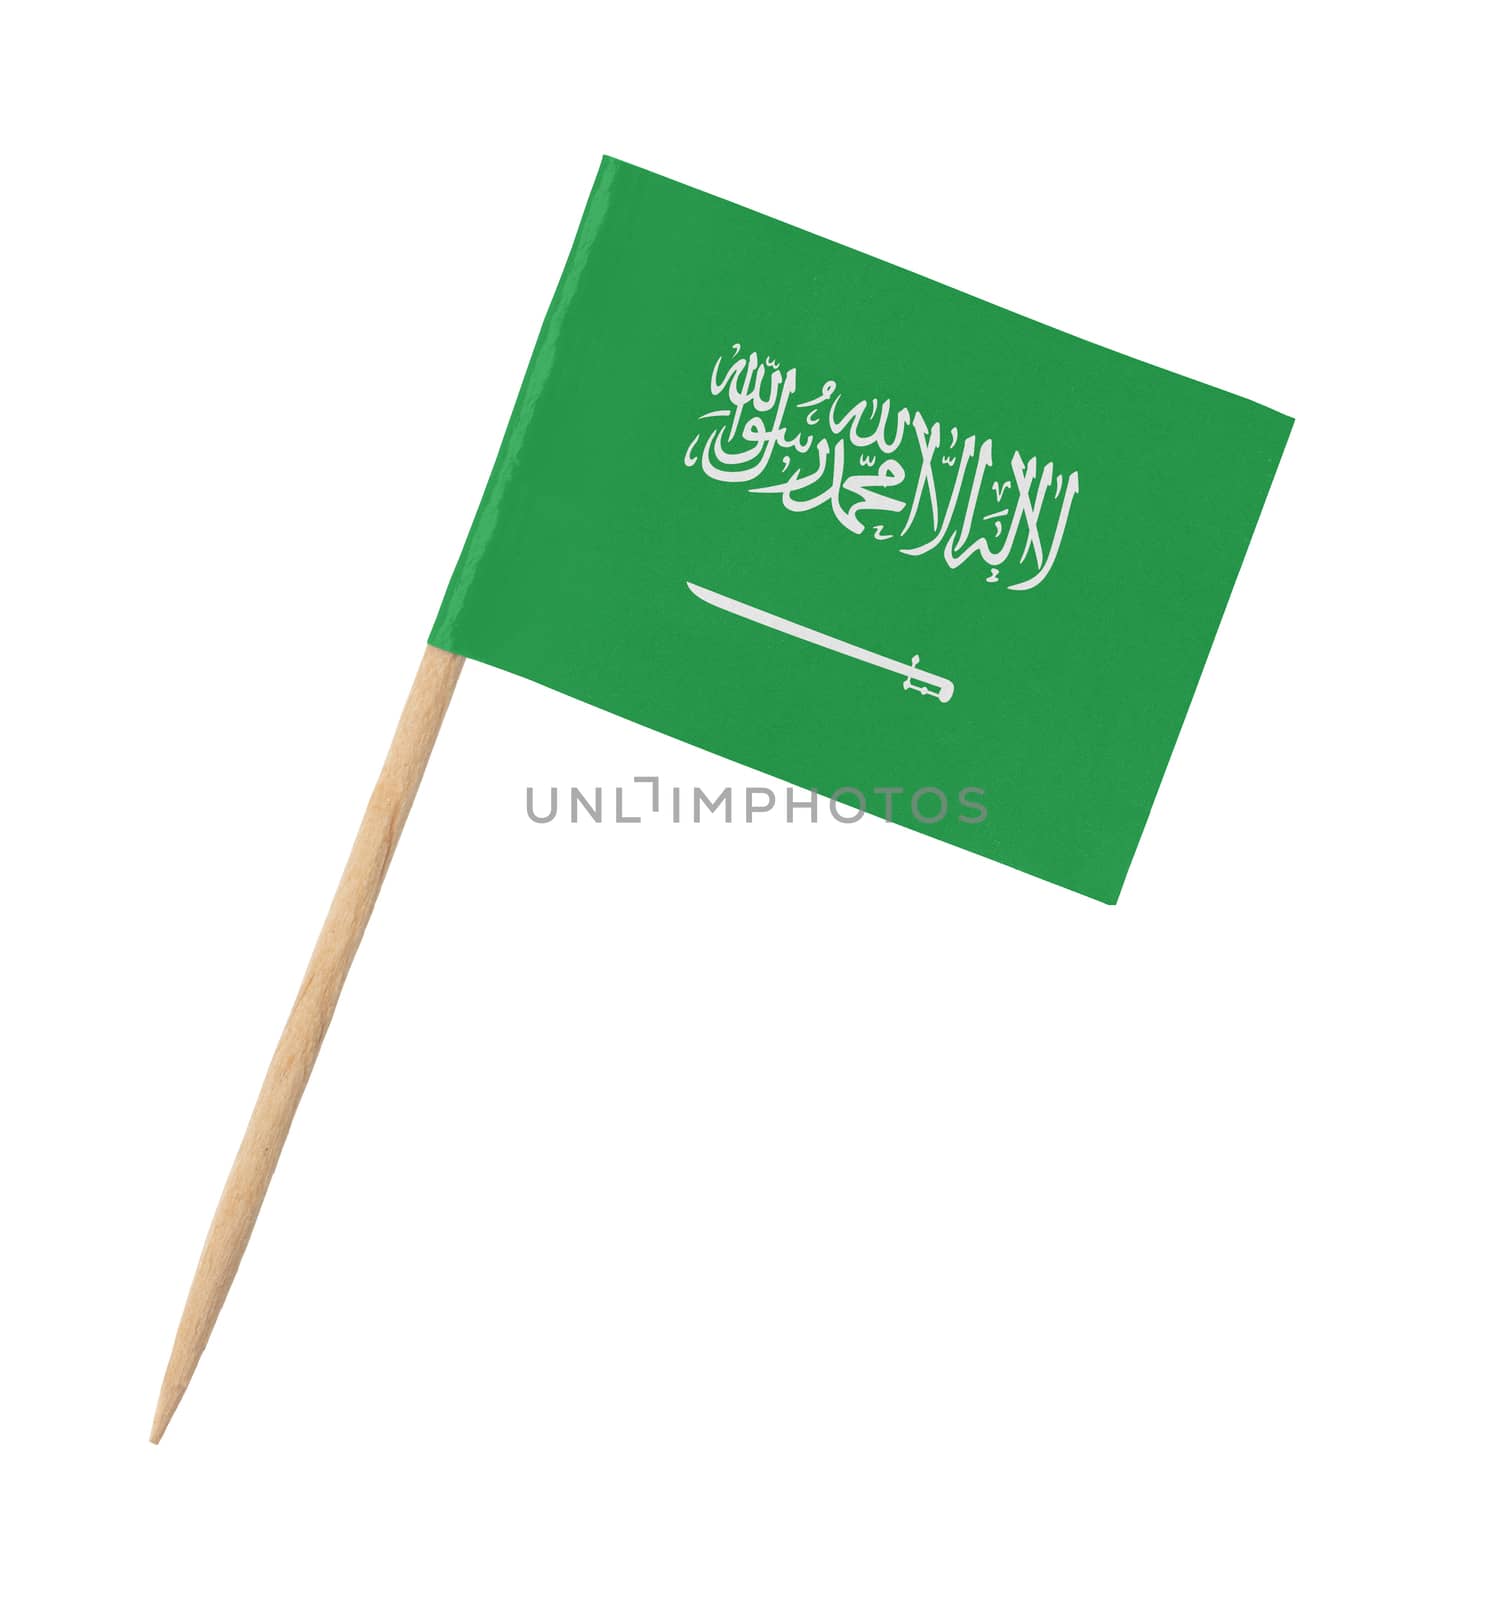 Small paper flag of Saudi Arabia on wooden stick, isolated on white